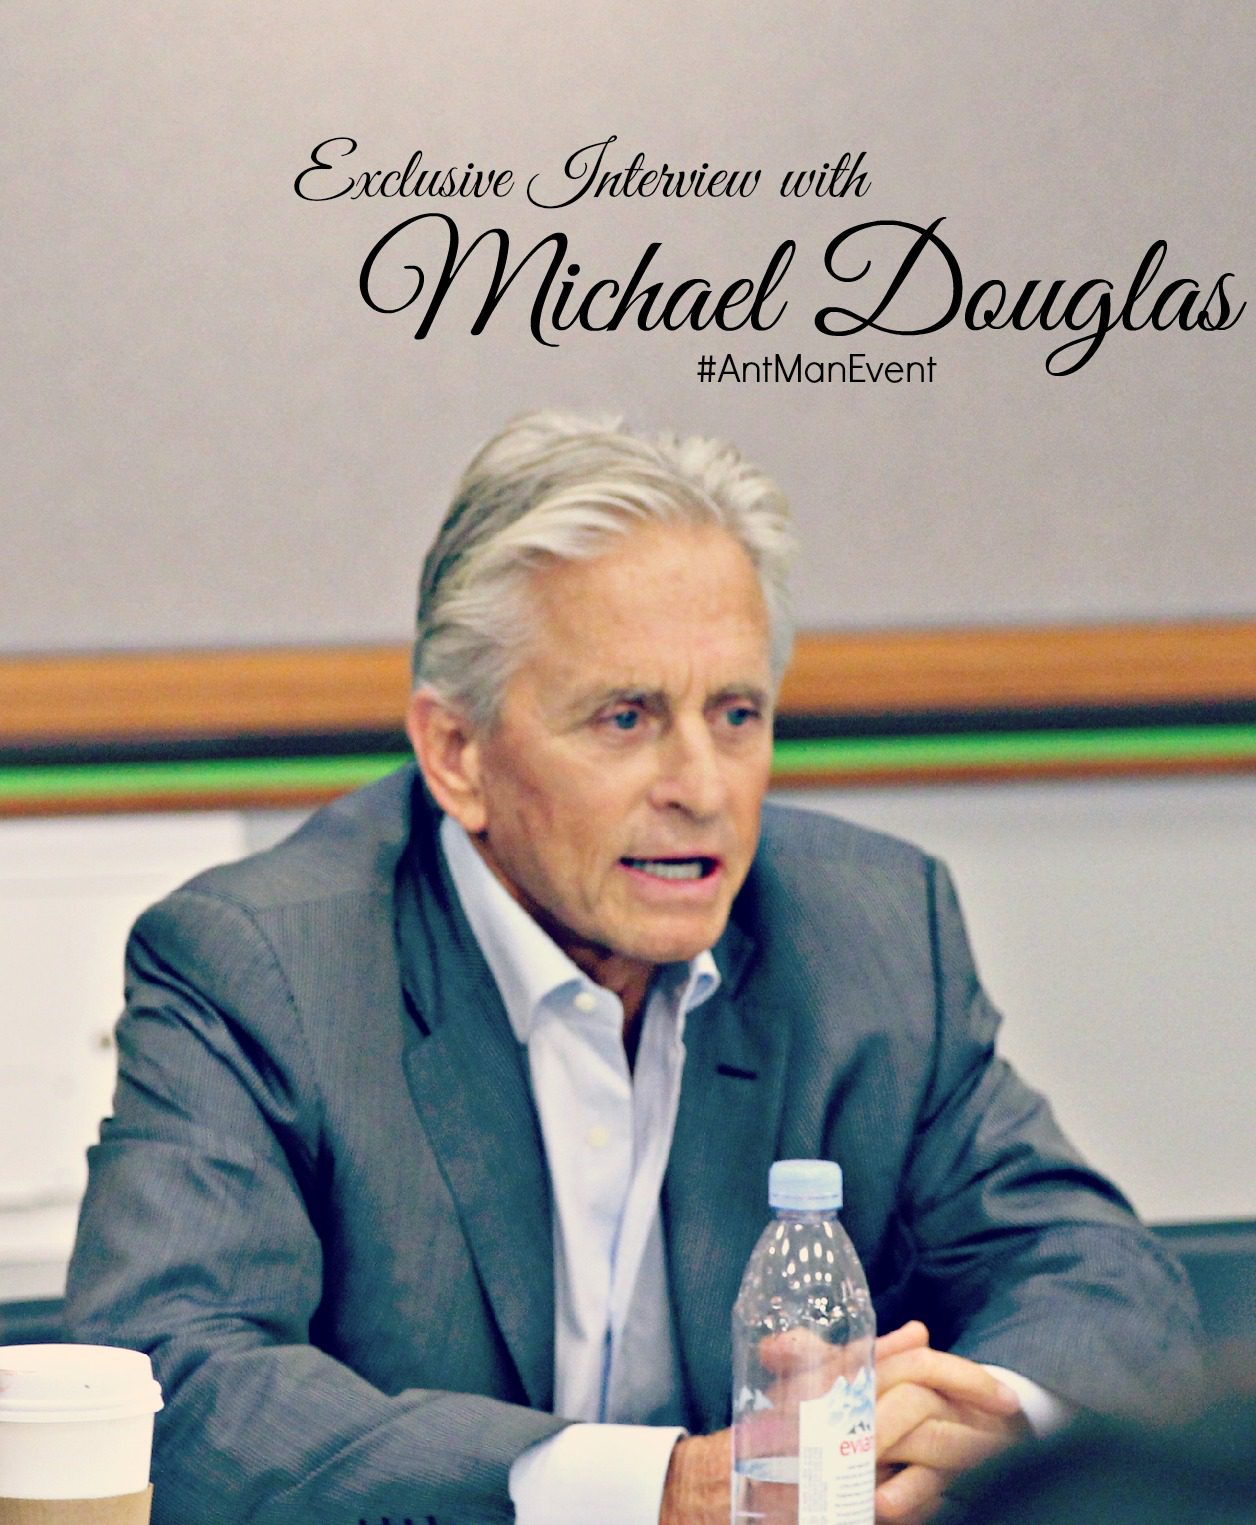 Read what Michael Douglas has to say about being in a Marvel movie in this Exclusive Interview #AntManEvent